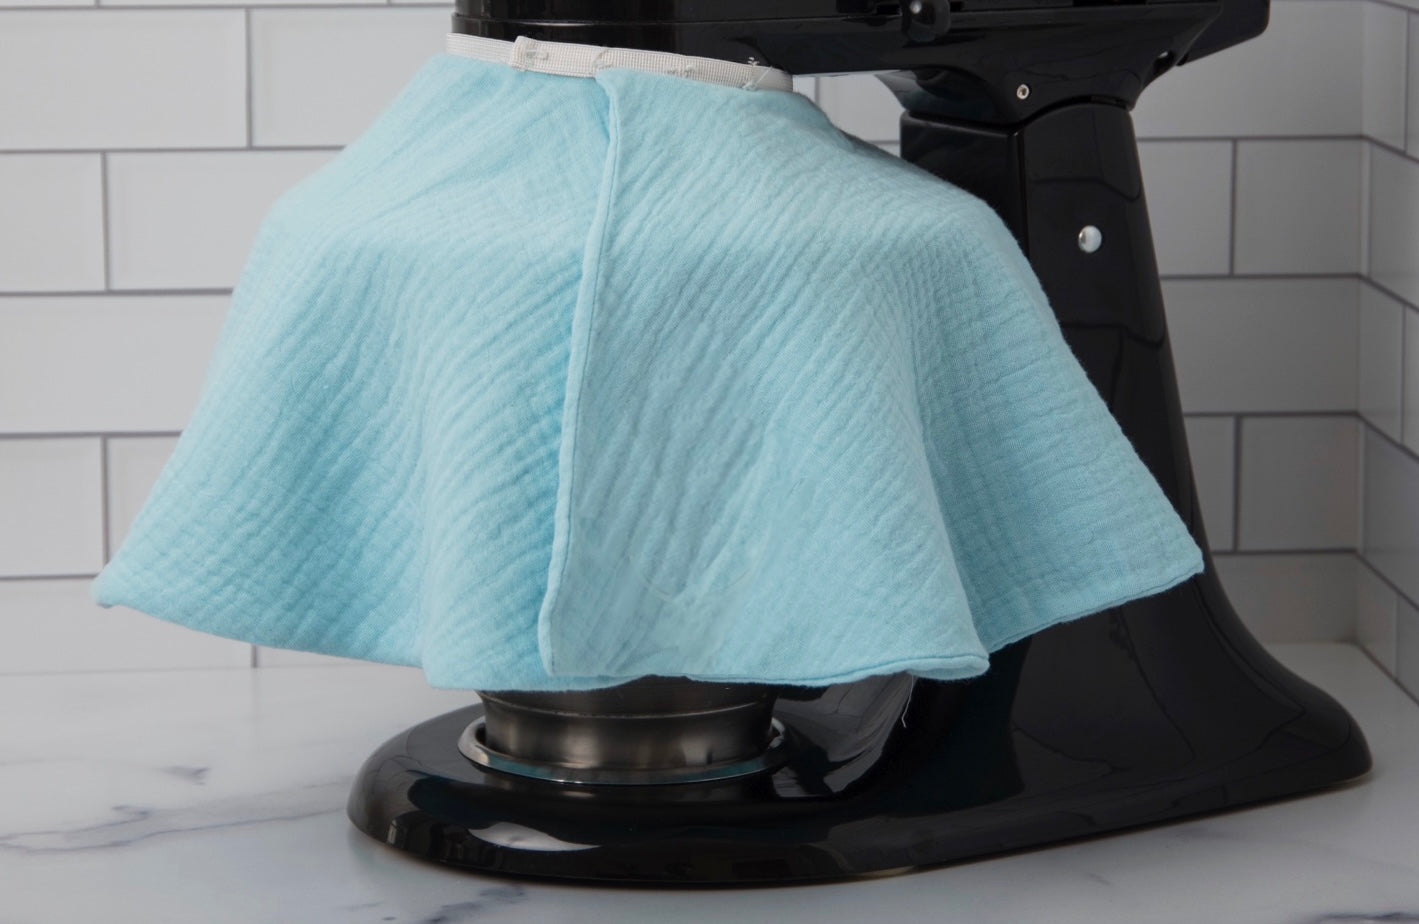 Flour explosions, powdered sugar clouds, and butter splatters- love your stand mixer but hate the mess? The Mixer Skirt is a fabric splash guard to keep your ingredi